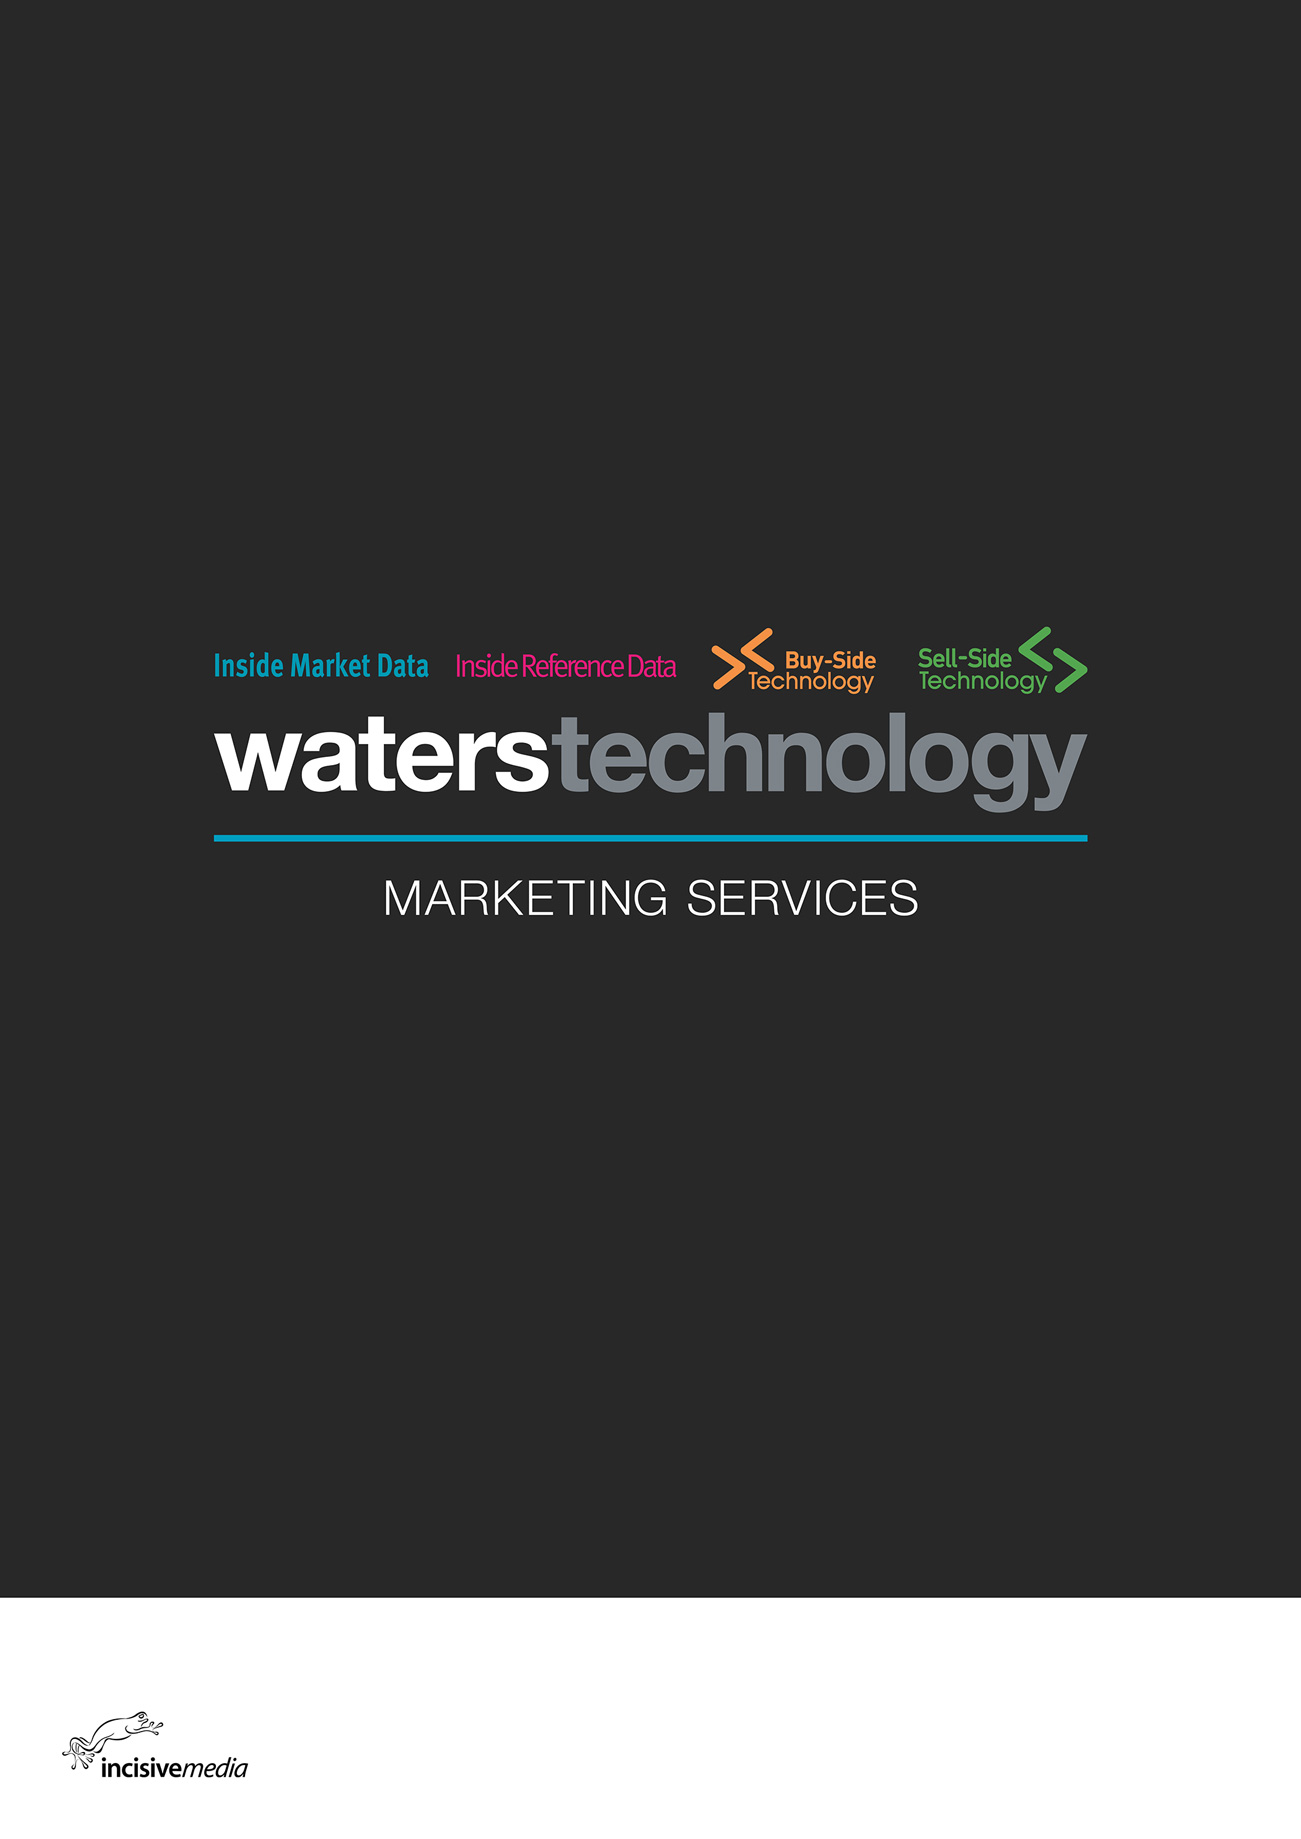 Front cover of brochure for Waters Technology. Includes the Waters logo and the logos for Waters' publications: Inside Market Data, Inside Reference Data, Buy-Side Technology, and Sell-Side Technology. The background is dark grey.